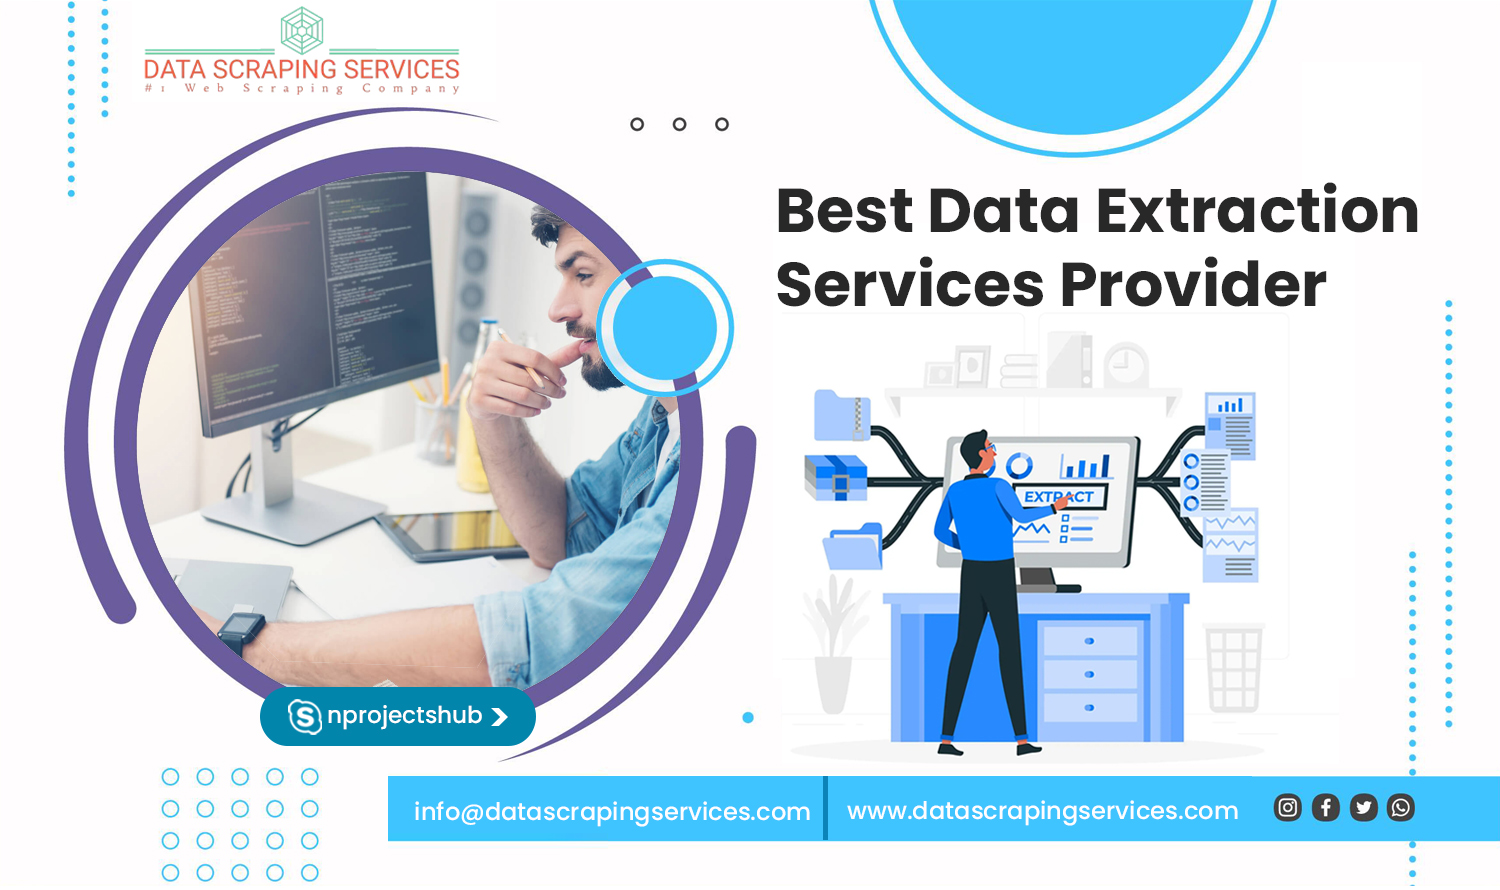 Best Data Extraction Services Provider